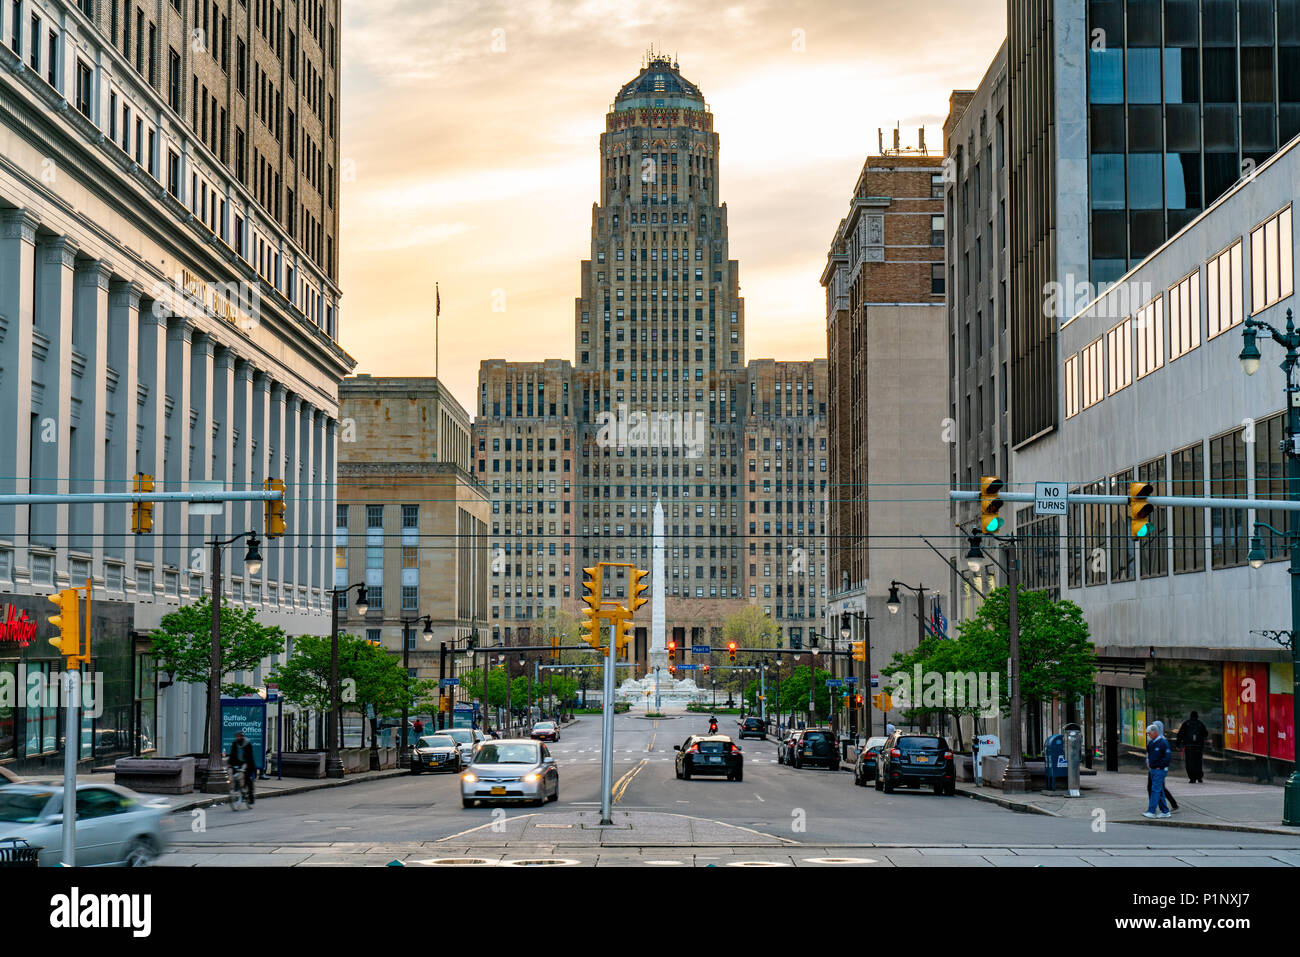 BUFFALO, NY - MAY 15, 2018: Looking down Court Street towards the Buffalo City Building and McKinley Monument in downtown Buffalo, New York Stock Photo